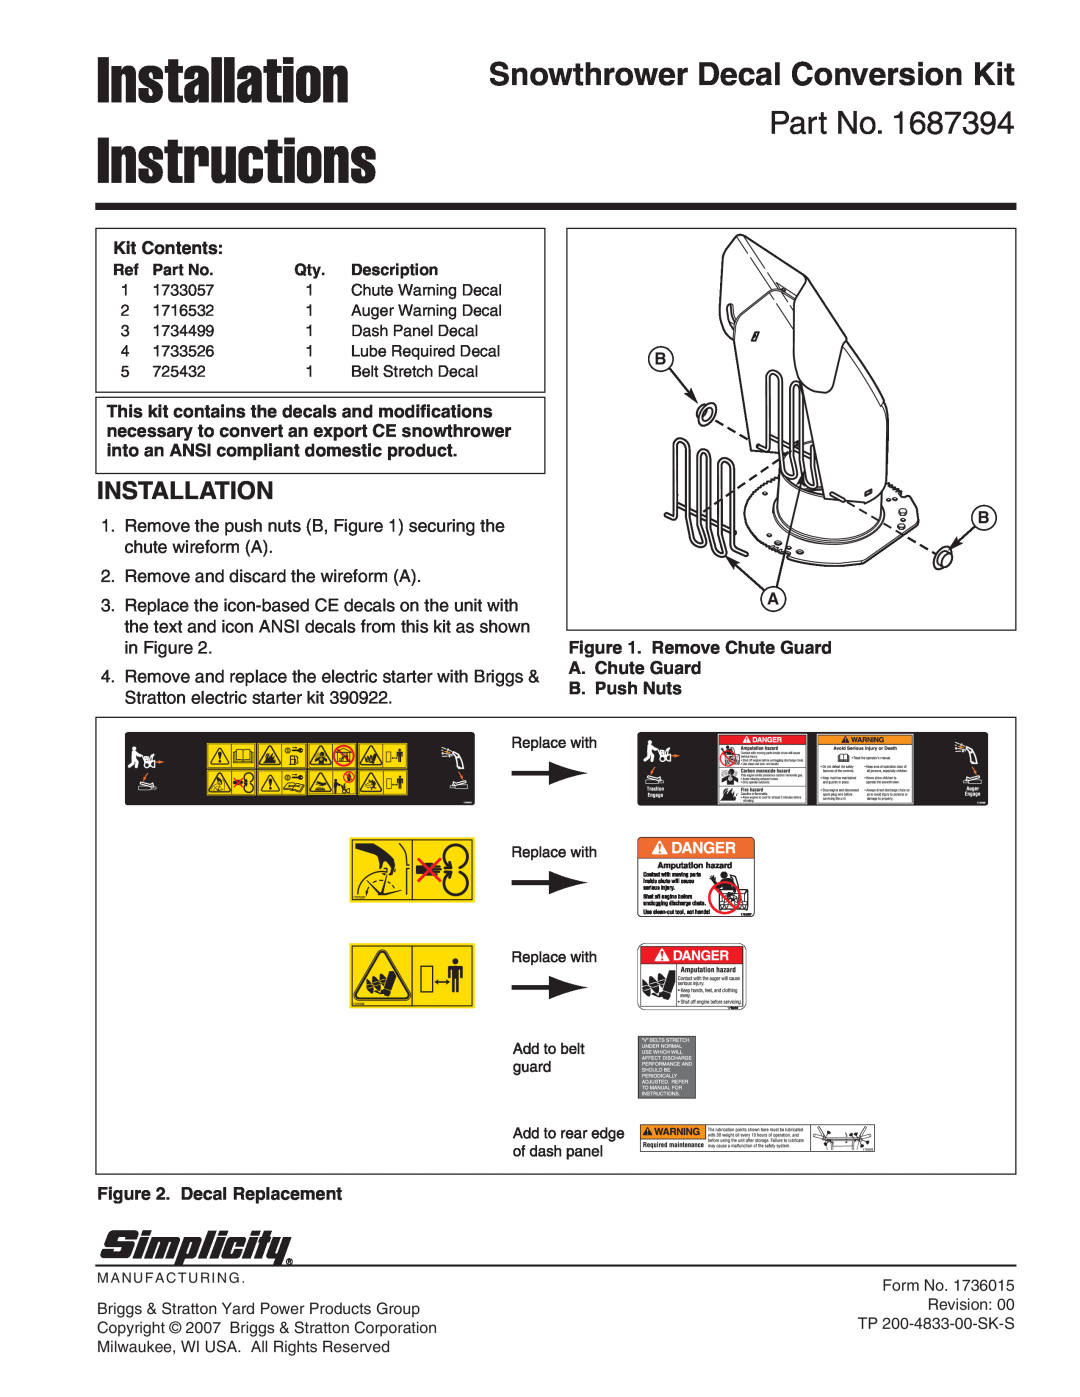 Simplicity 1687394 installation instructions Installation Instructions, Snowthrower Decal Conversion Kit, Kit Contents 